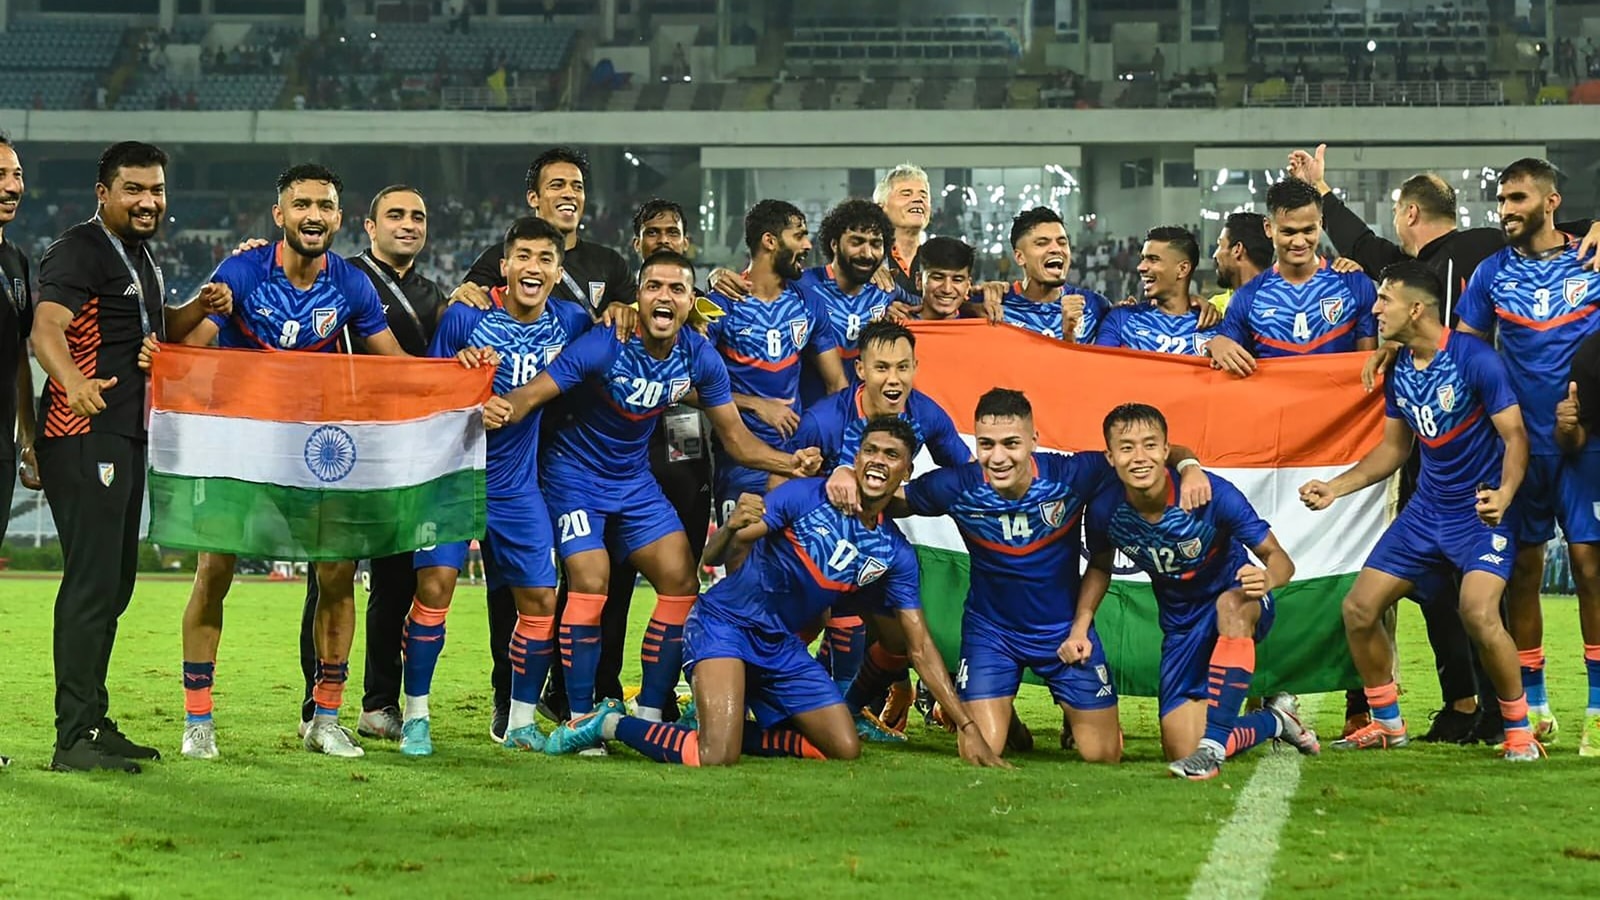 AIFF hired astrologer for Indian football team’s good luck: Report